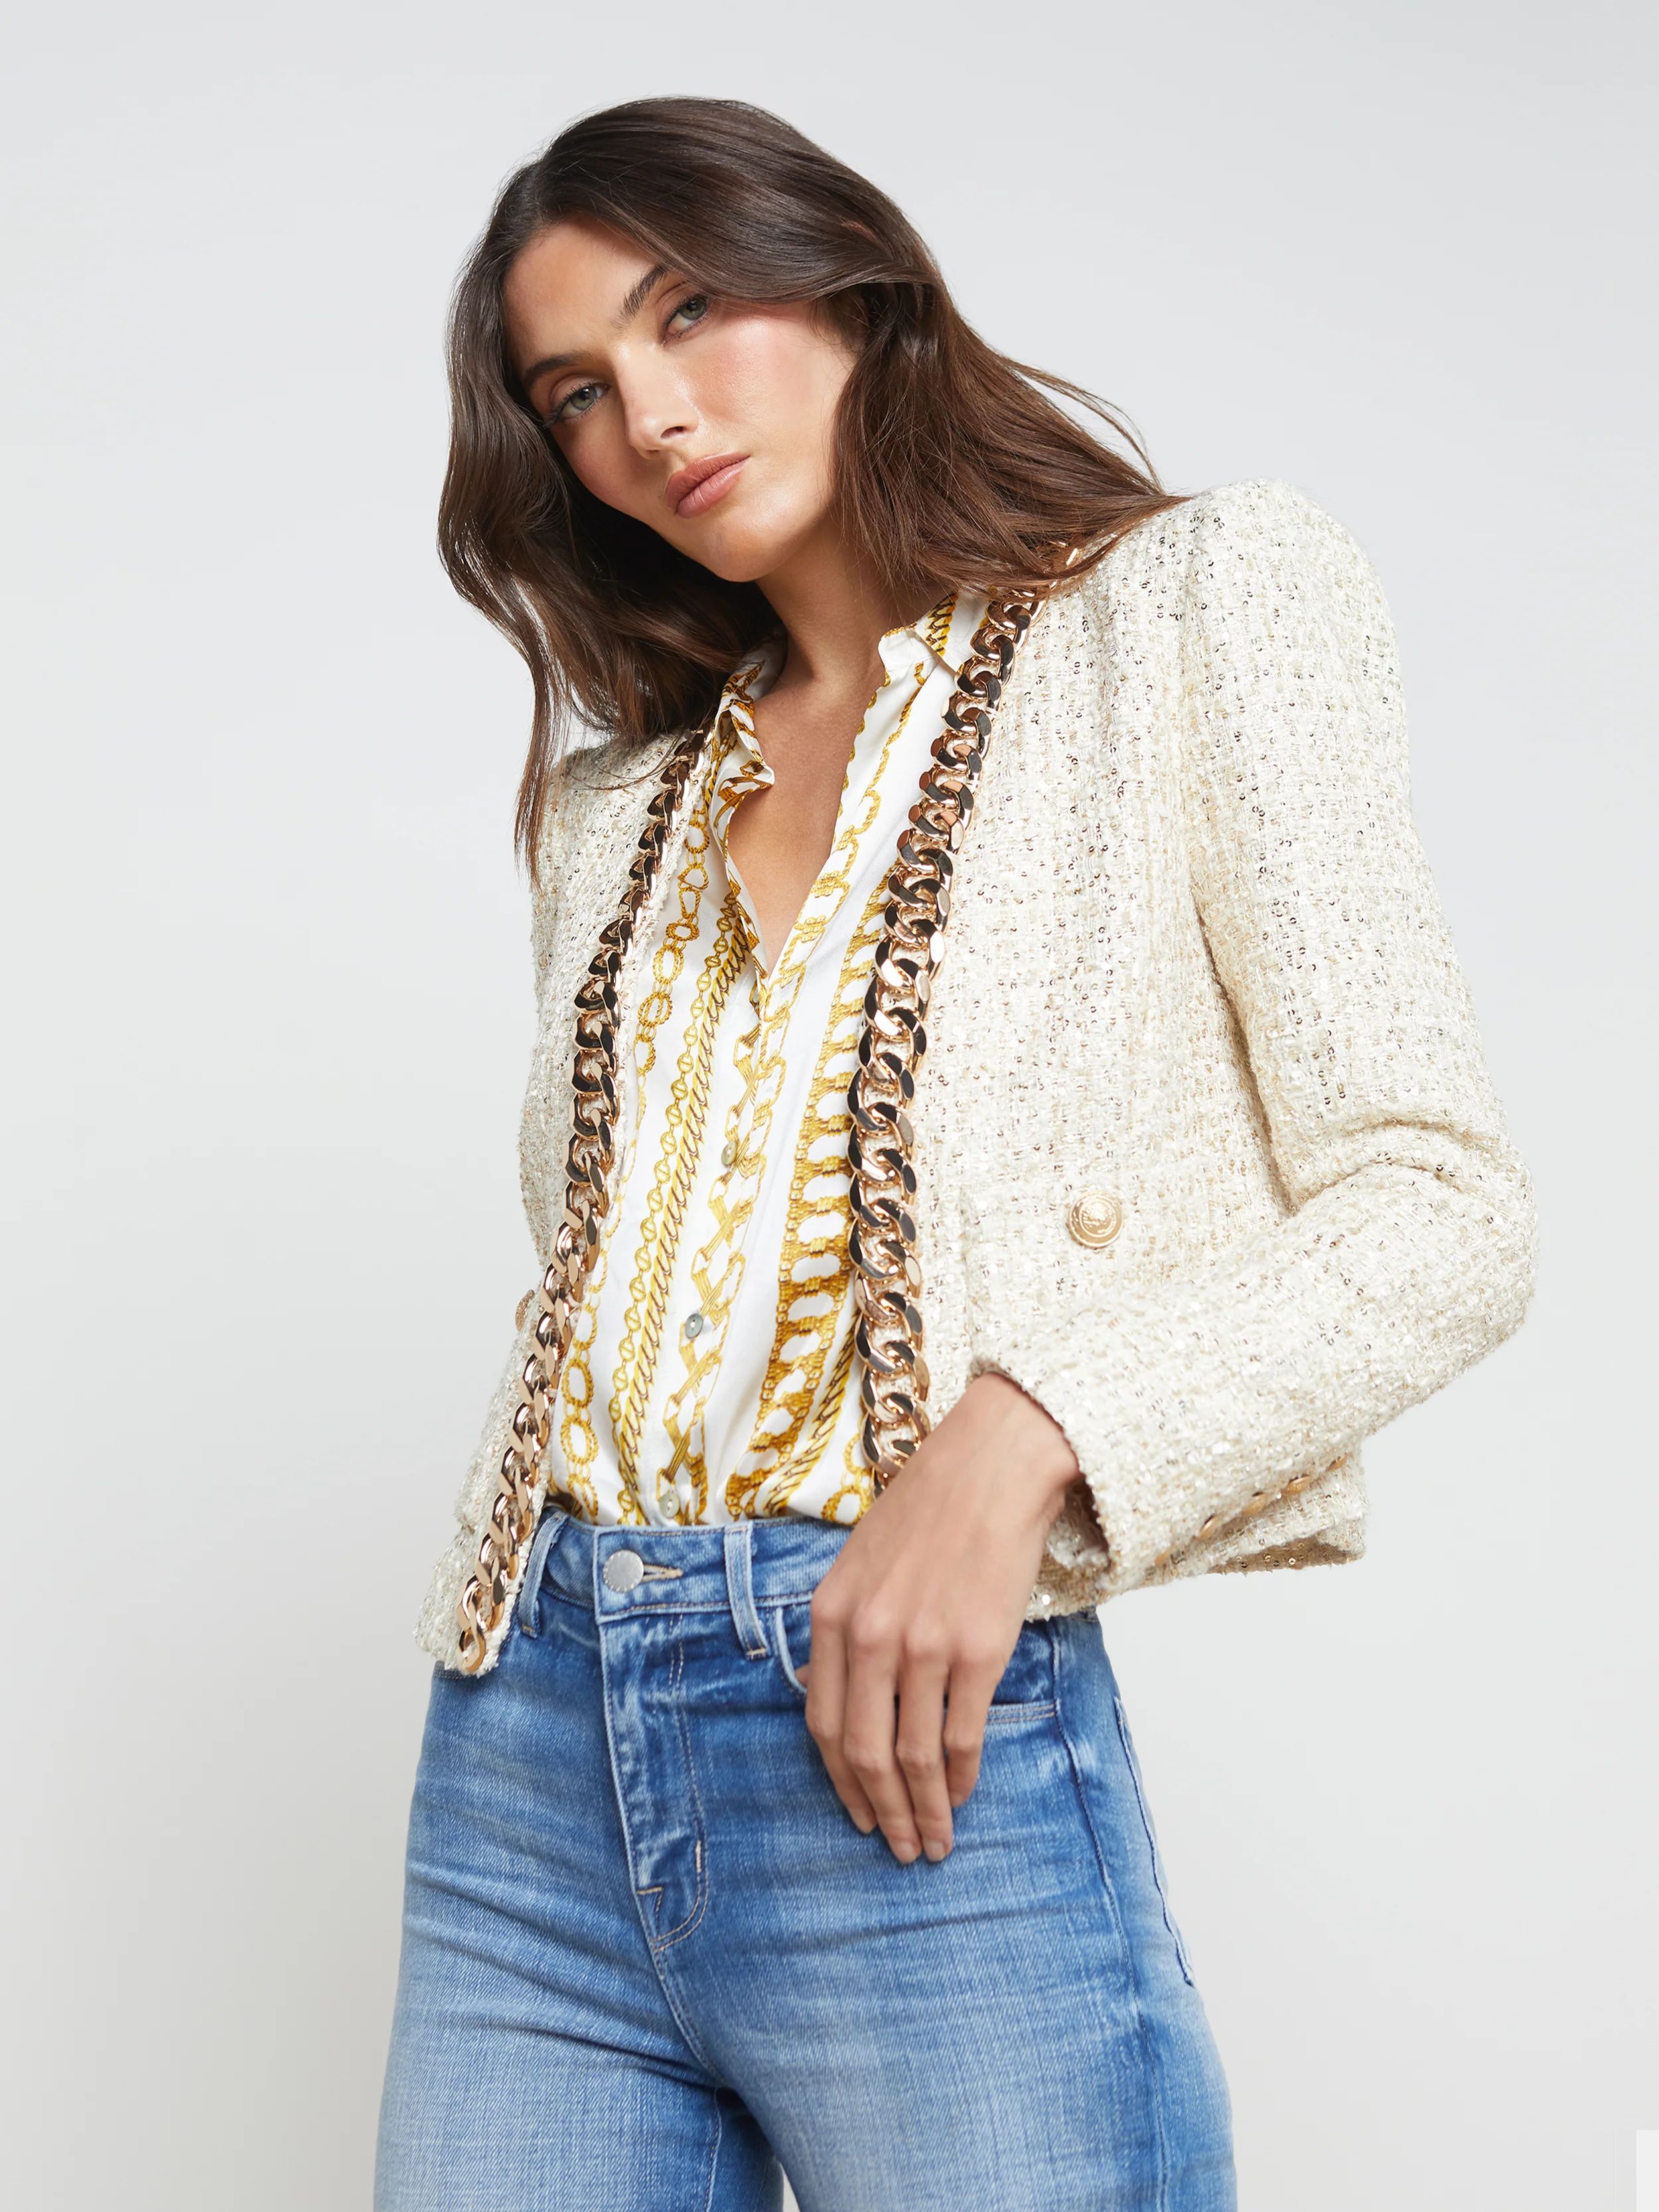 L'AGENCE Greta Chain Jacket in Champagne/Gold | L'Agence